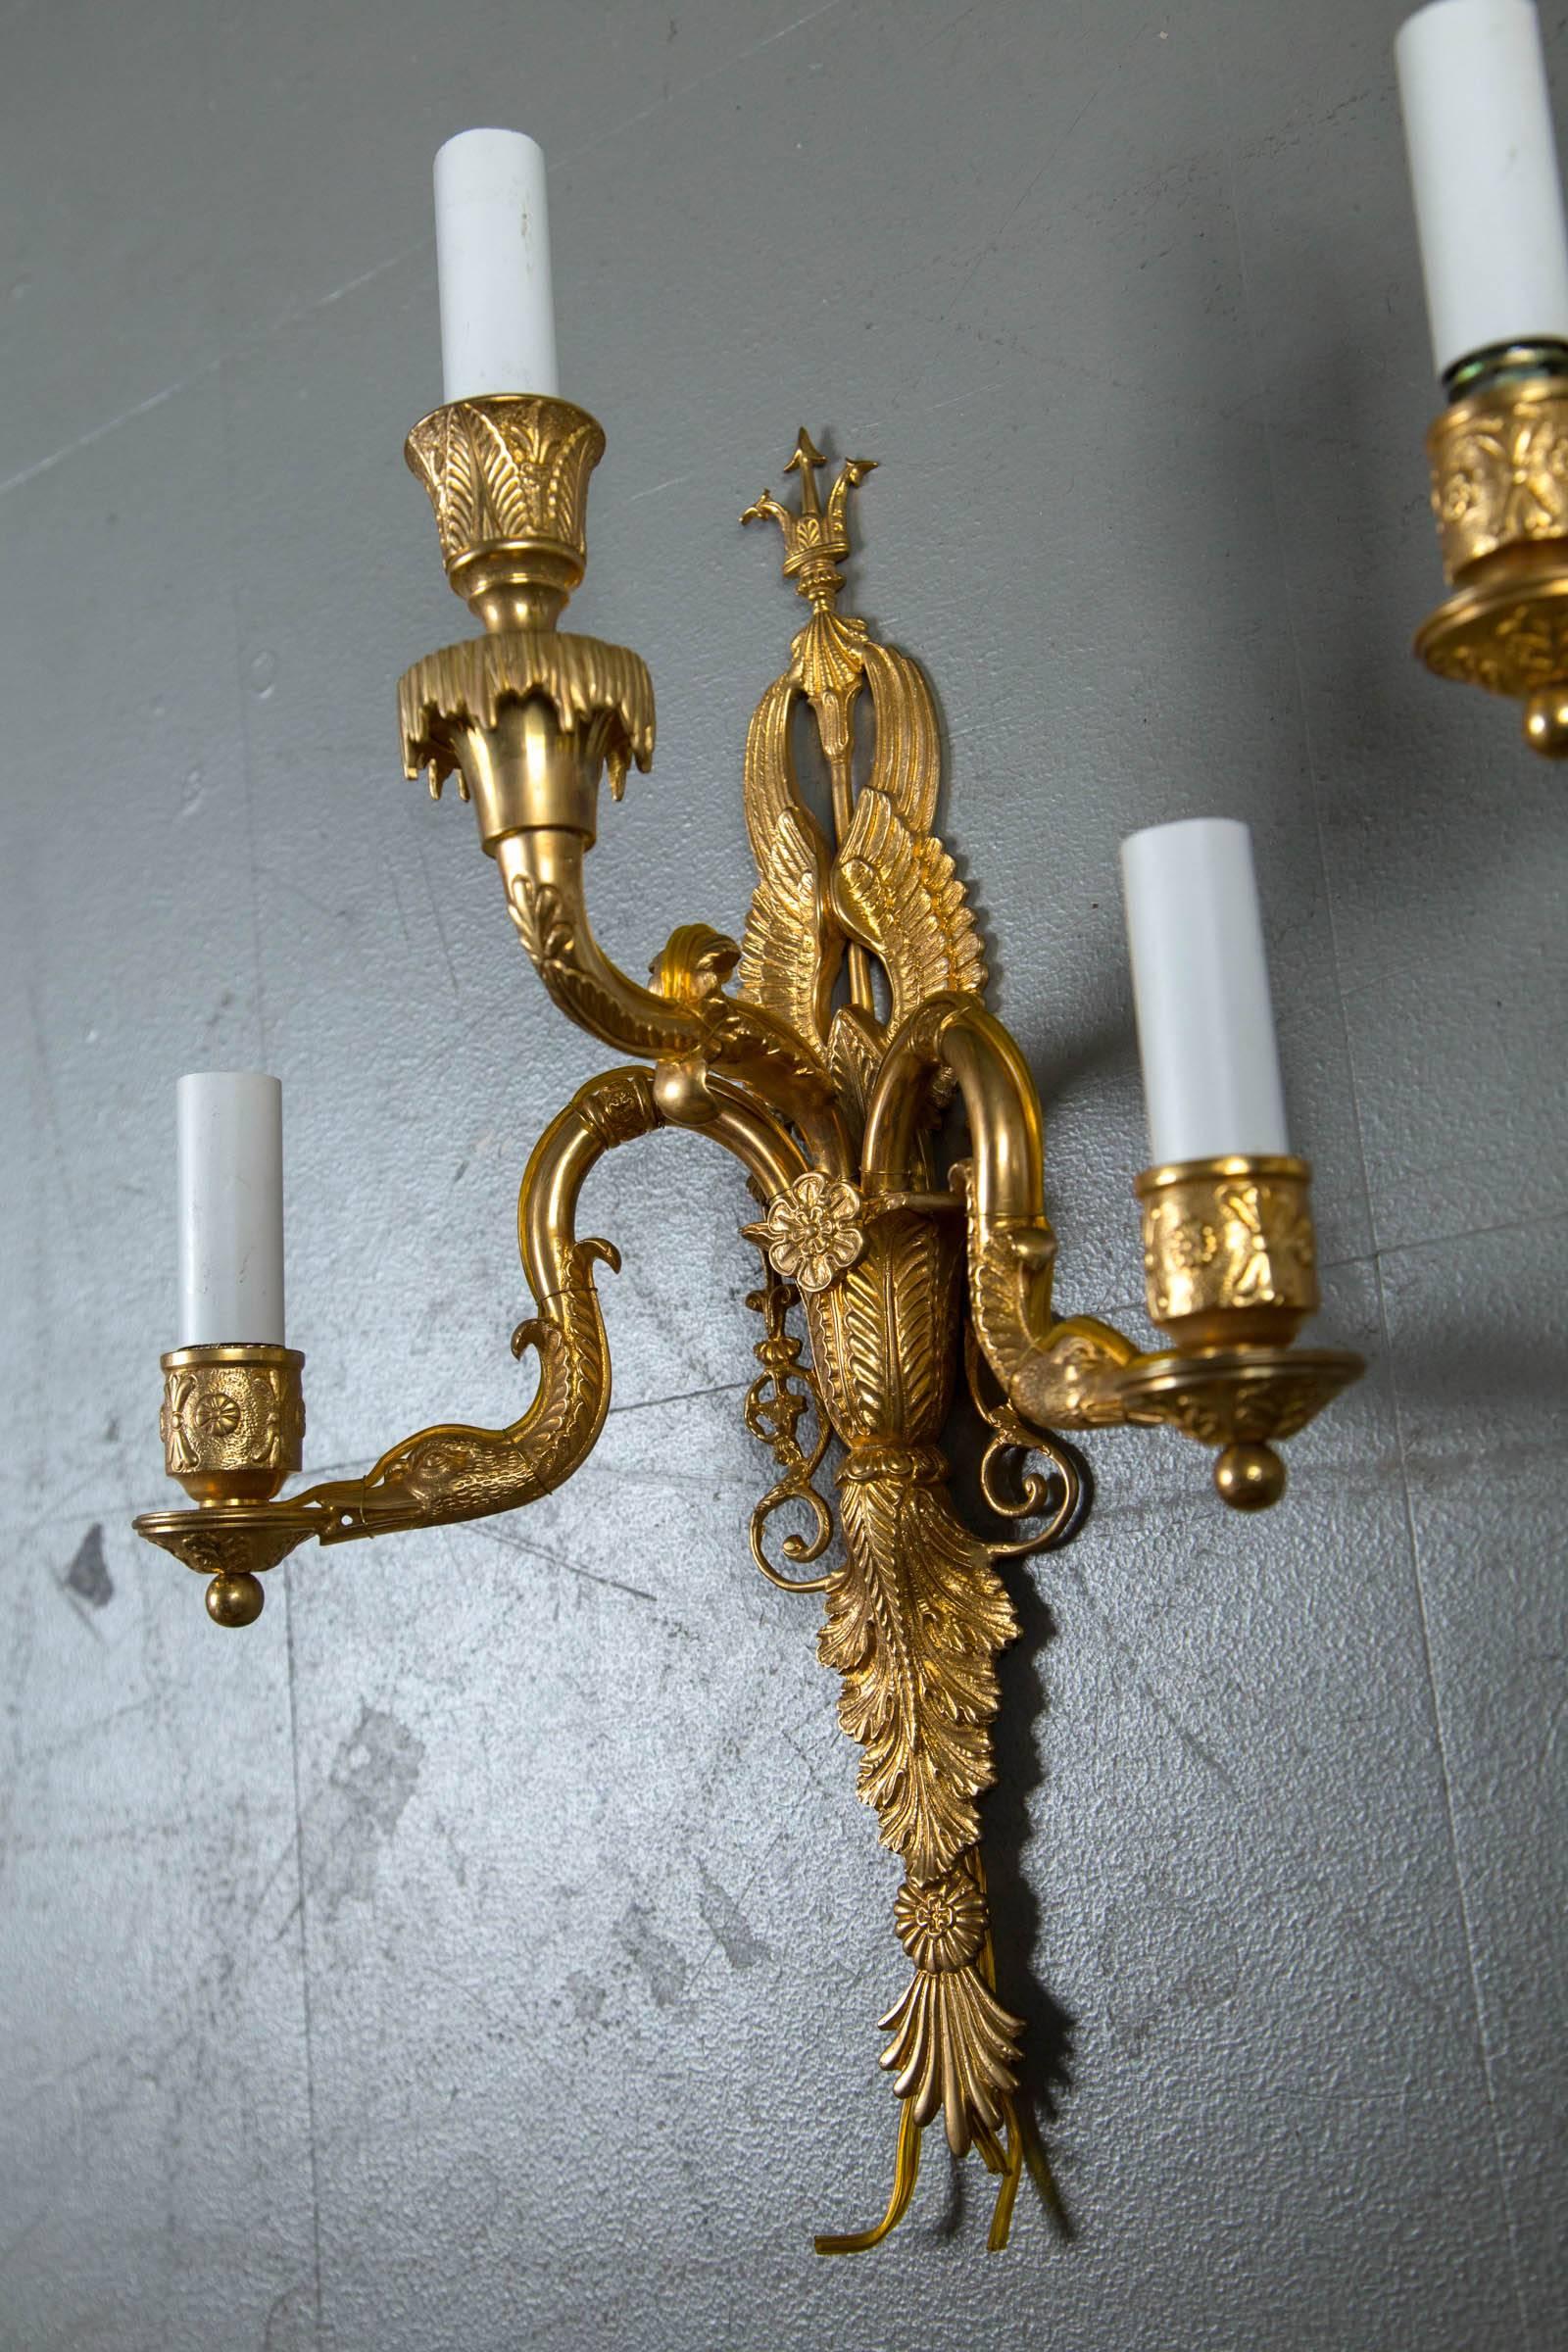 Pair of 1930 French Empire Style Sconces with Three Lights In Excellent Condition For Sale In Stamford, CT